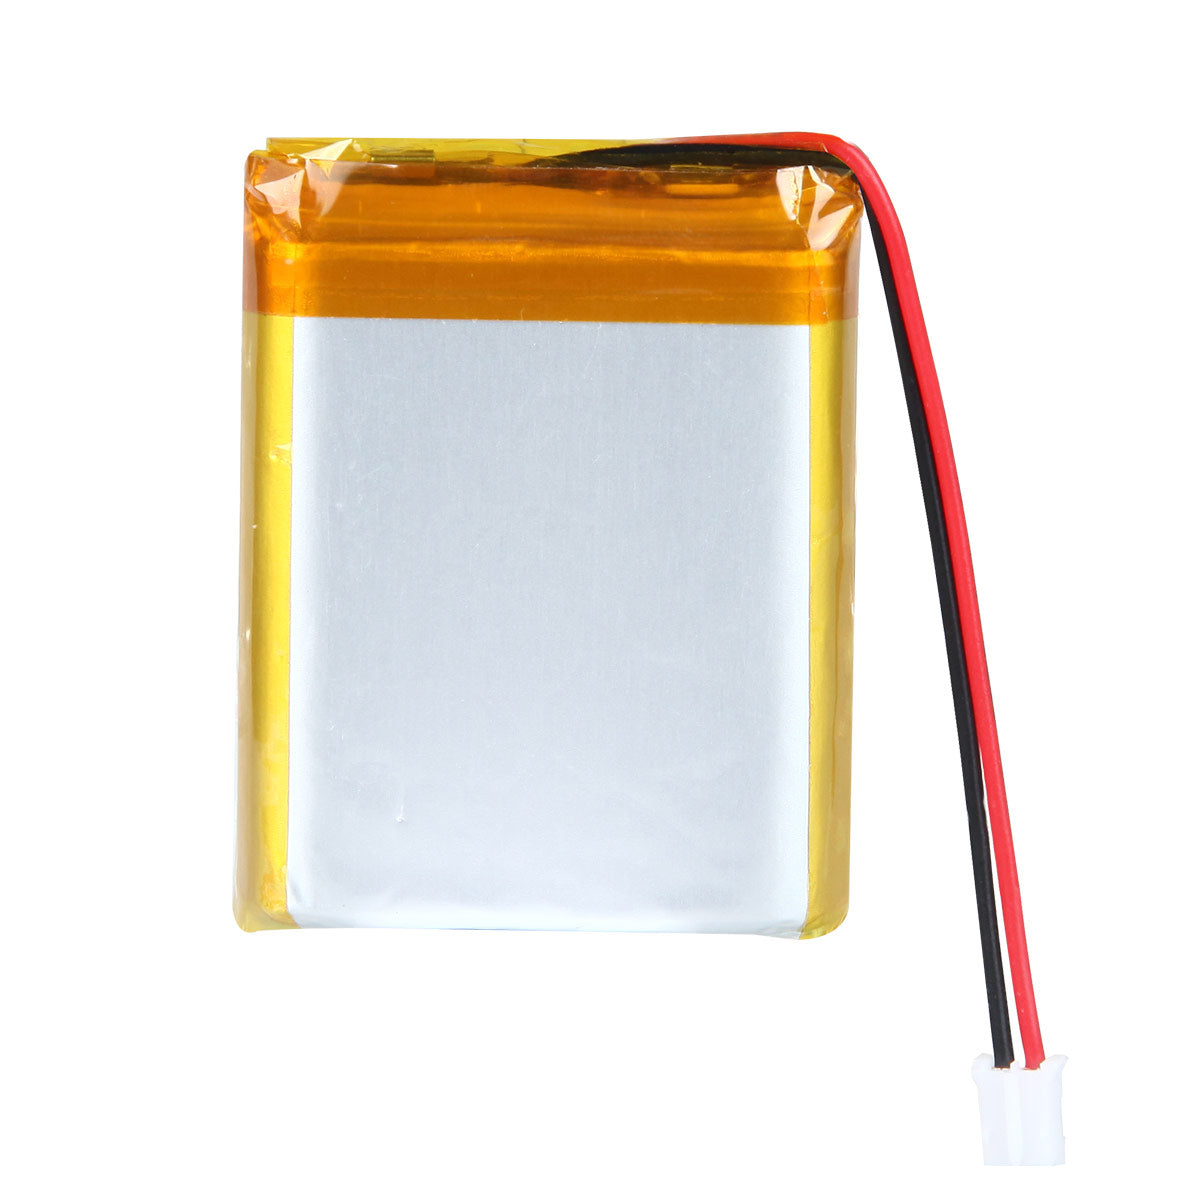 3.7V 2300mAh 104050 Rechargeable Lithium Polymer Battery Length 52mm